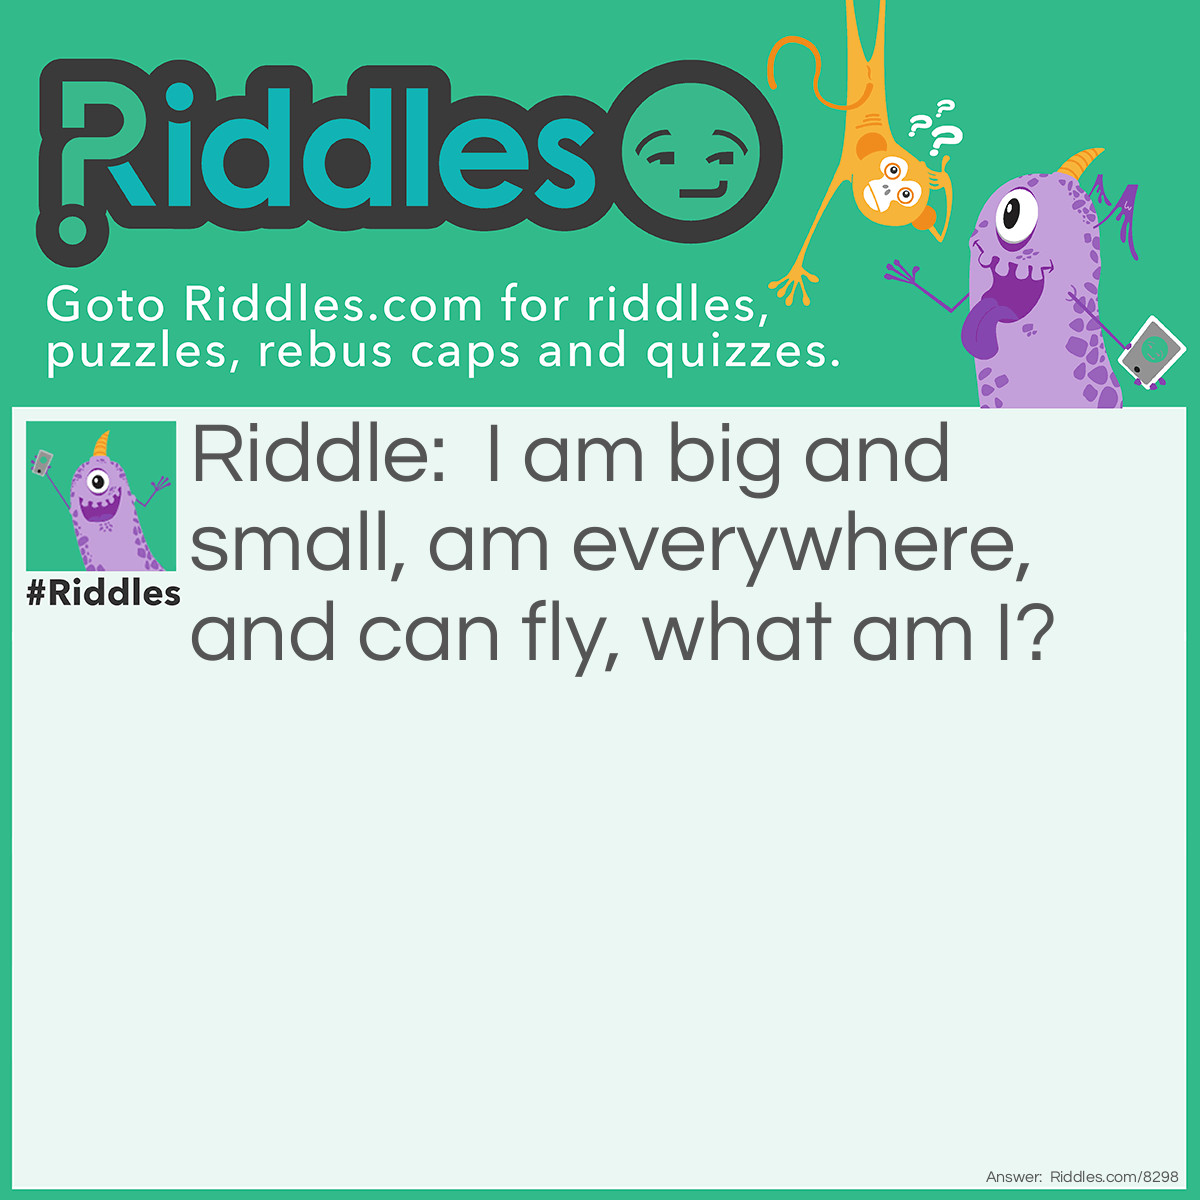 Riddle: I am big and small, I am everywhere and I can fly.  What am I? Answer: Clouds.